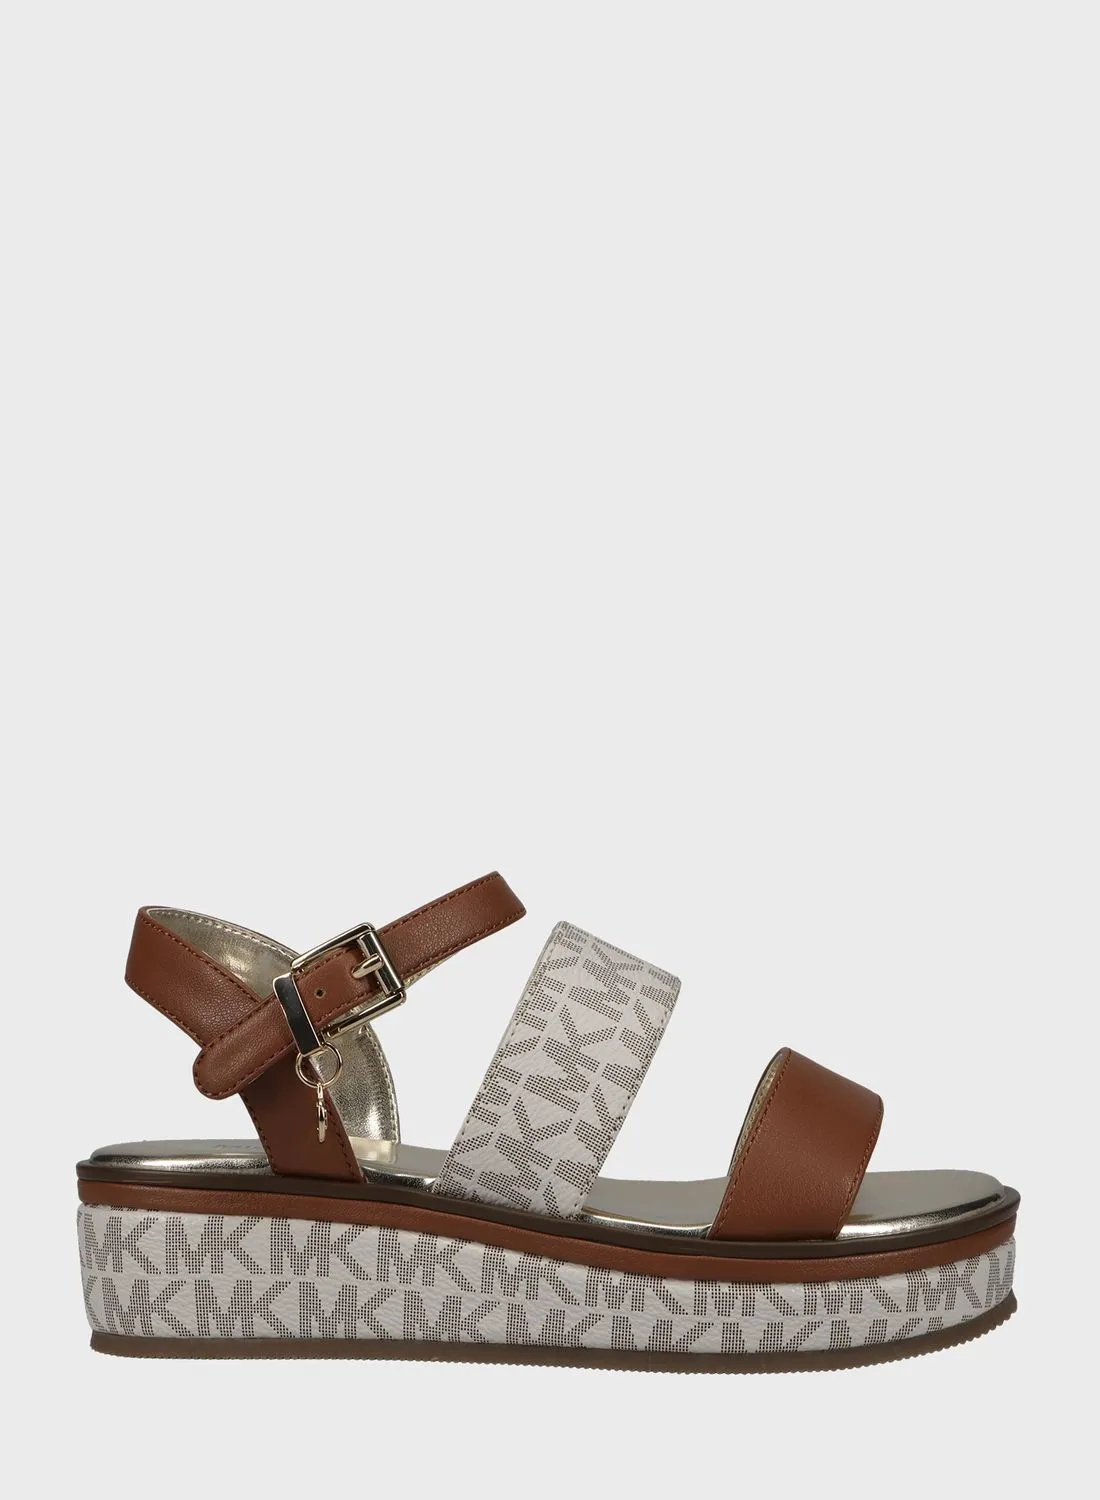 Michael Kors Youth Richie Charms Sandals